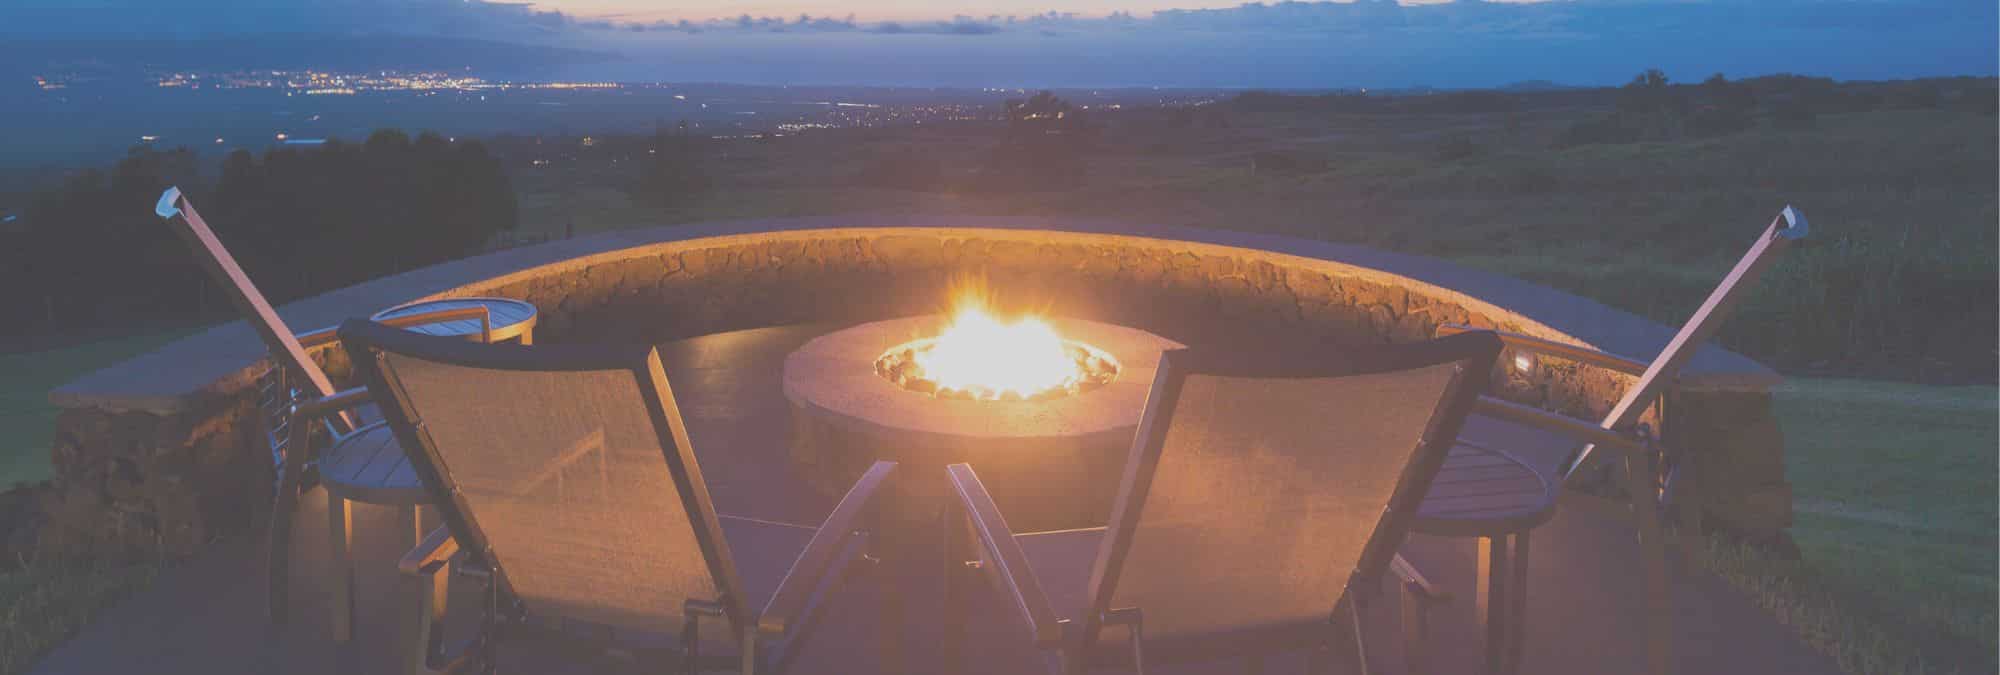 buying second home with backyard fire pit fire burning sunset rain cloud horizon with city lights in valley